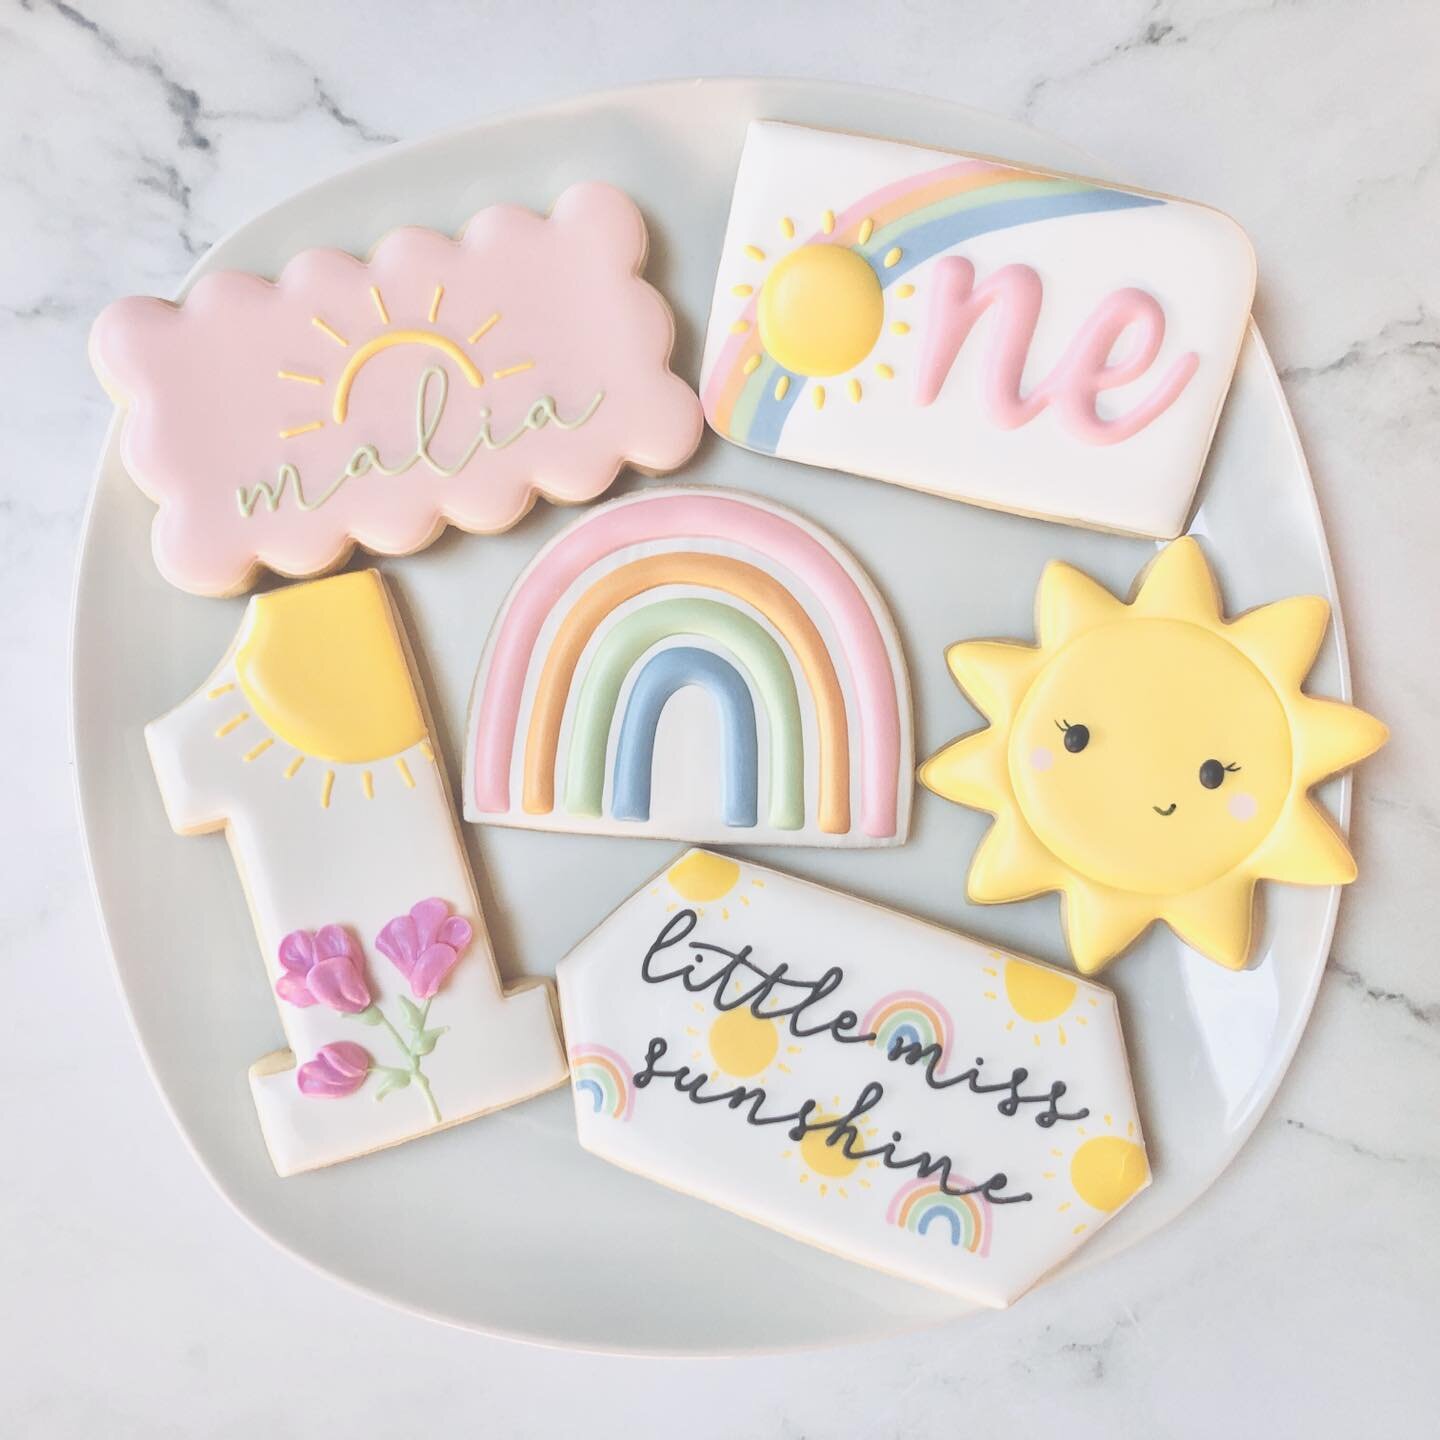 Cookies for a first birthday celebration! 🎉☀️🌈
.
.
.
.
. 
#thisisone #firstbirthday #happybirthday #happybirthdaycookies #birthdaycookies #birthdaytreats #birthdaypartyfavors #partyfavors #momsofinstagram #cookiefavors #royalicing #royalicingcookie